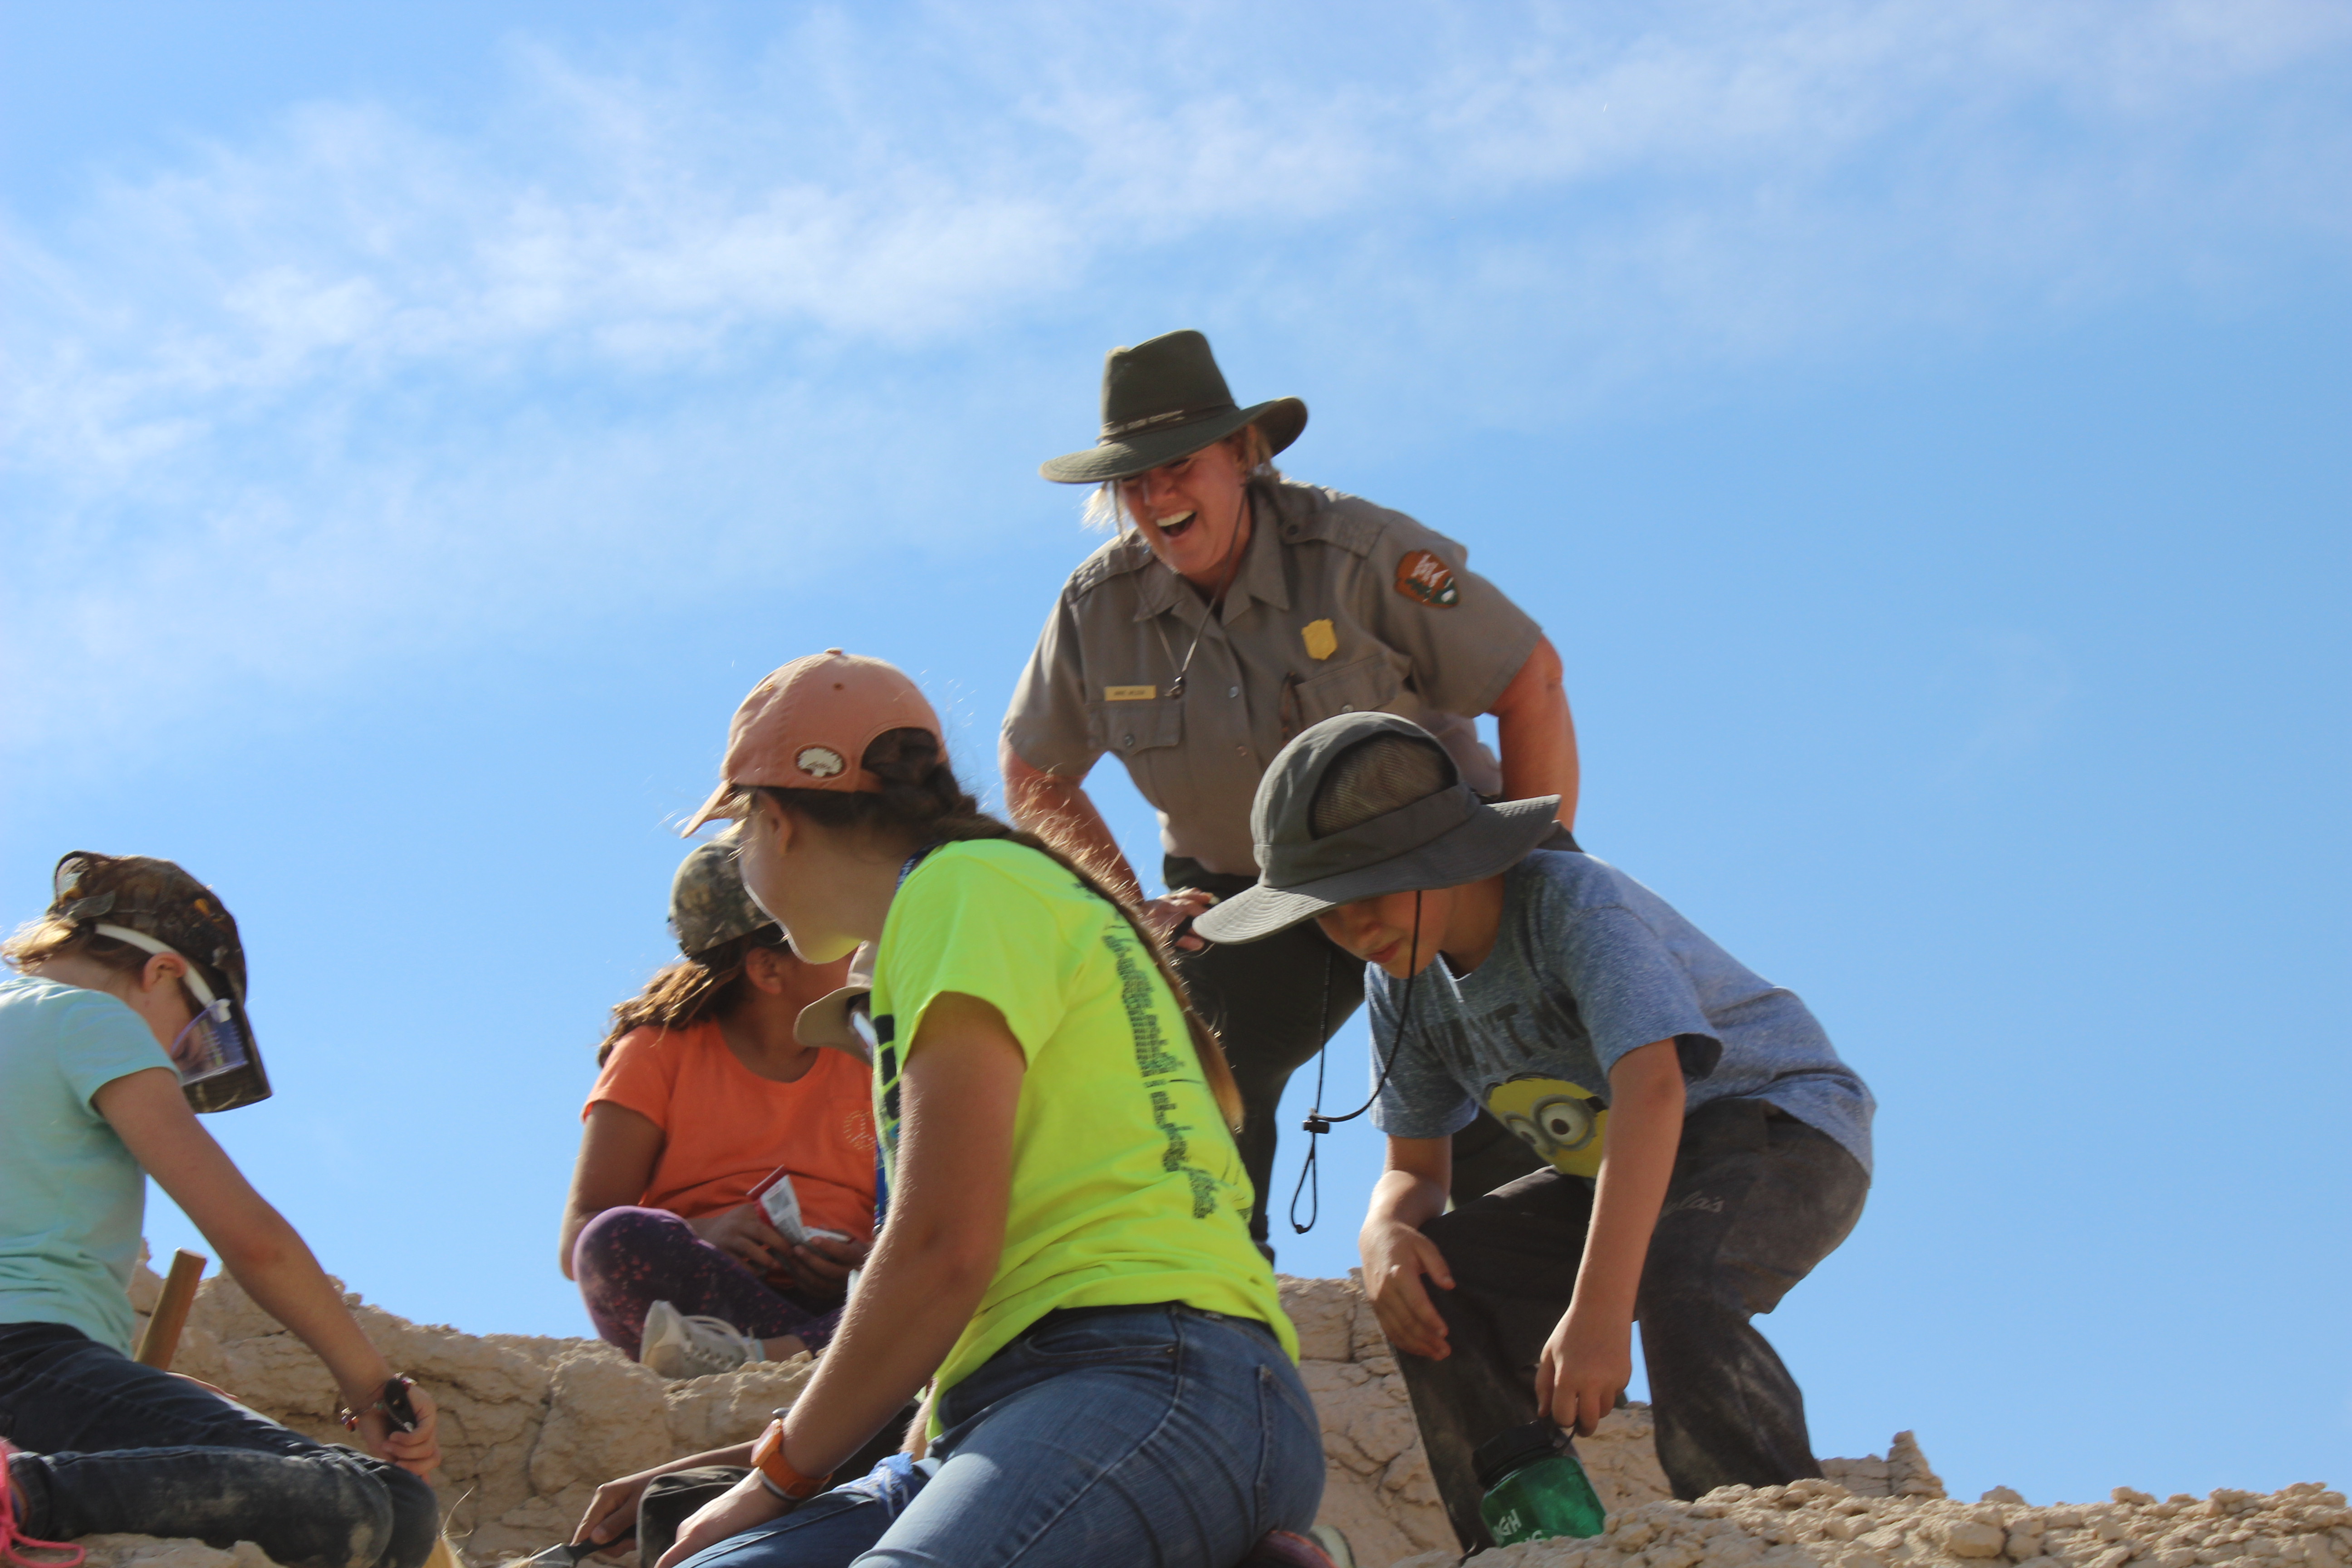 A smiling blond ranger in uniform and hat crouches over observing 4 kids wearing bright clothes and hats excavating fossils on a hill of dirt under a clear blue sky.